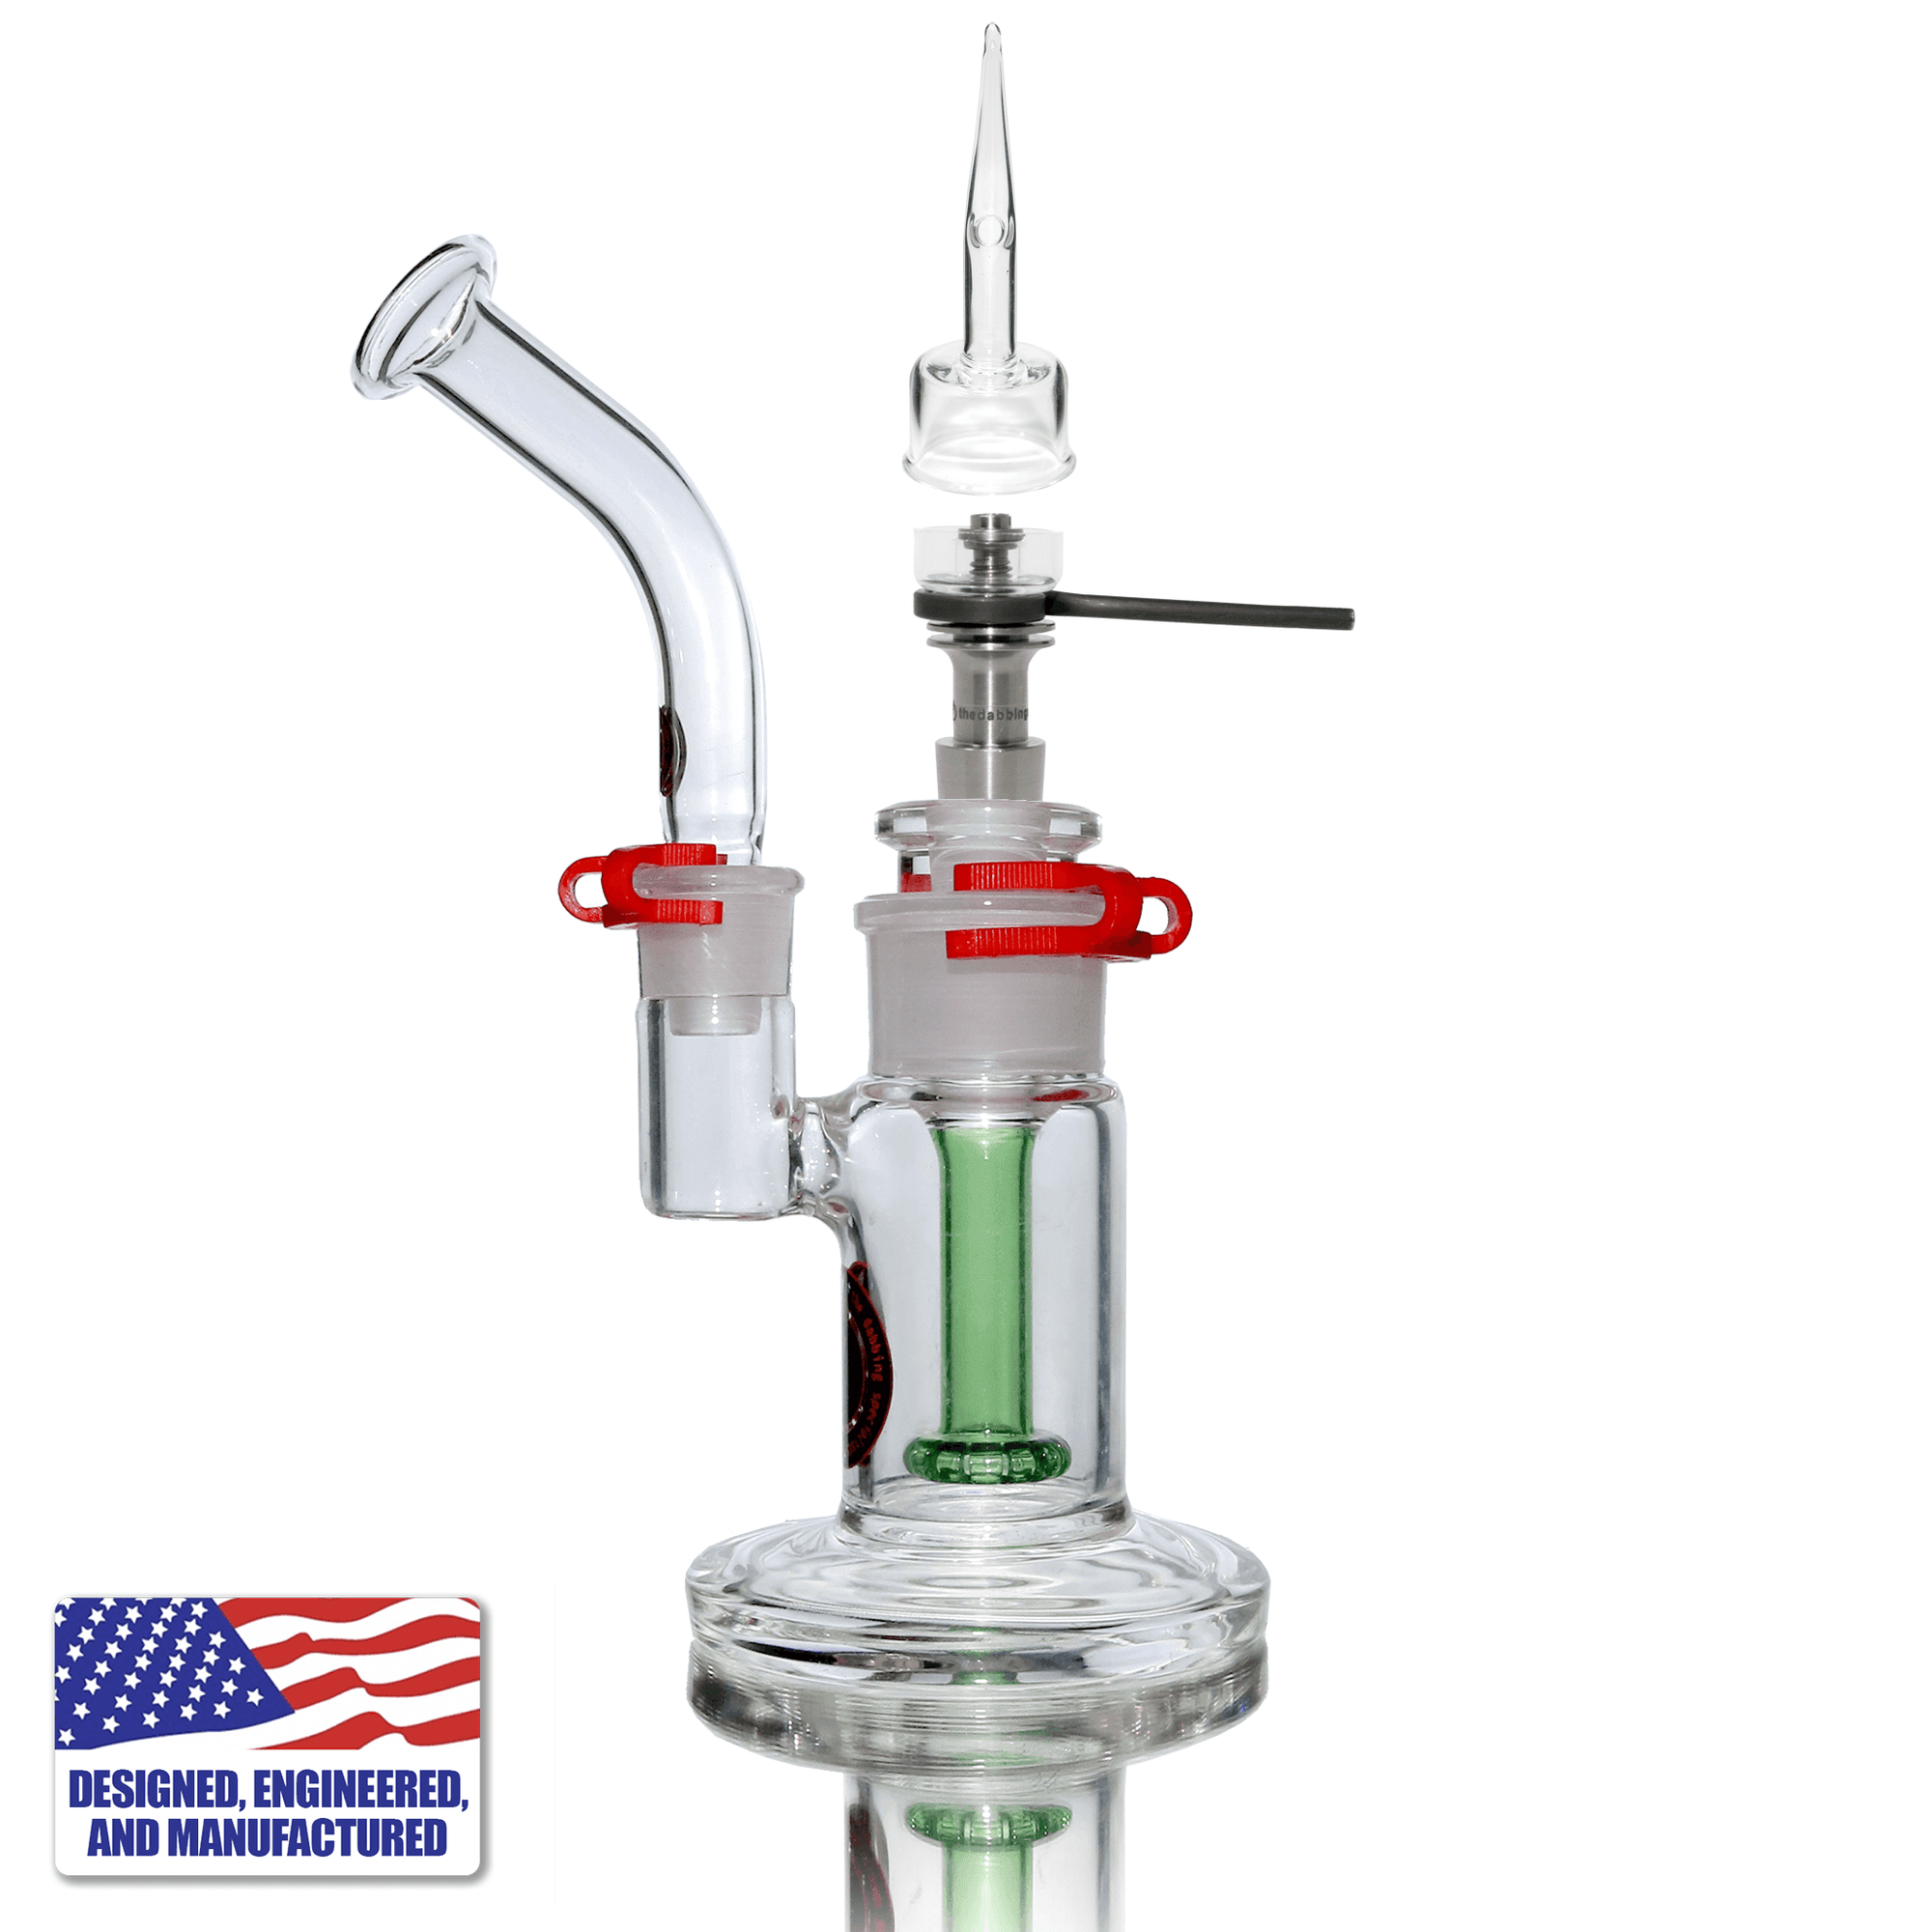 Portable Dabbing Kit | Showerhead Bubbler with Flat Coil Nail | In Use View | TDS